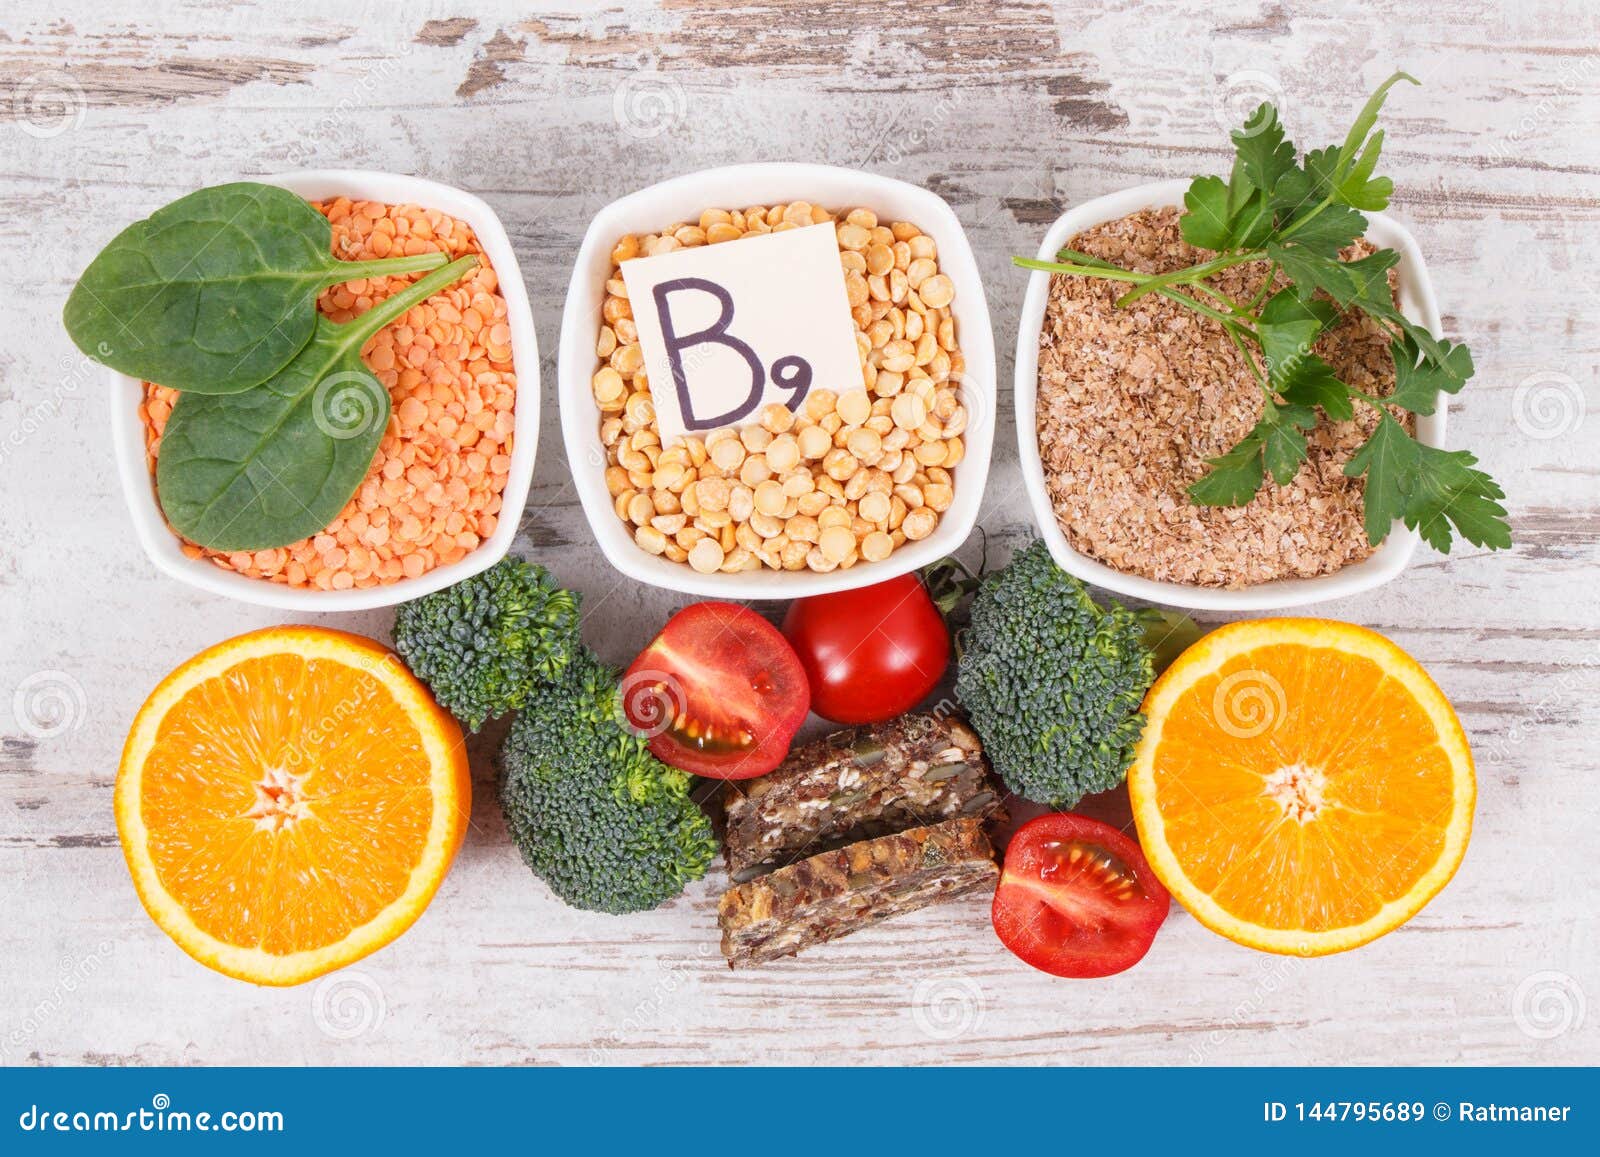 Nutritious Different Ingredients Containing Vitamin B9